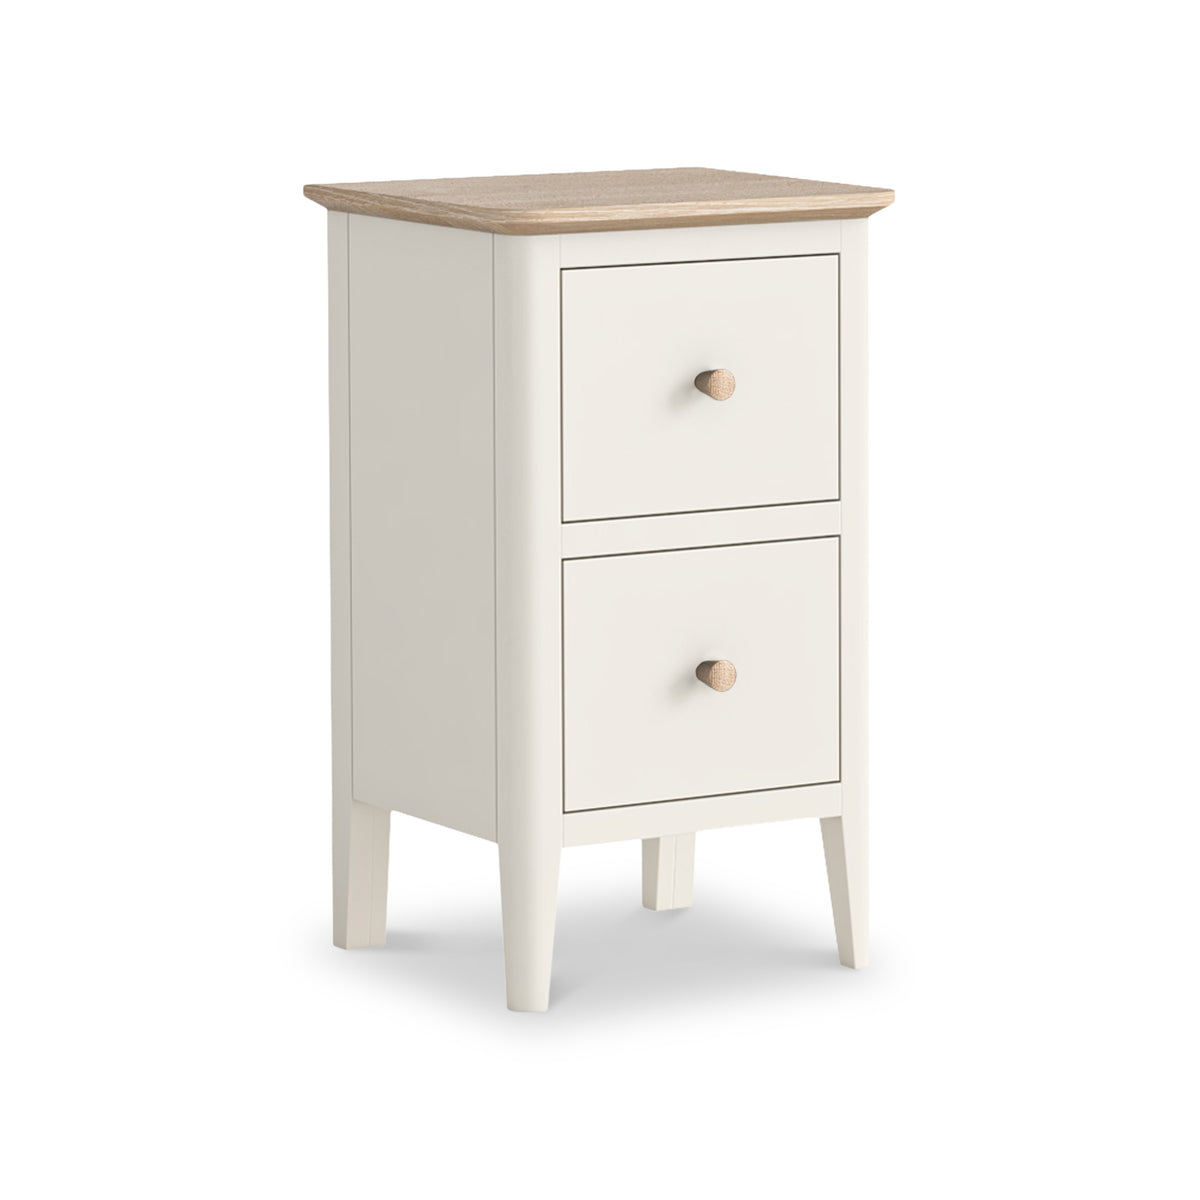 Penrose Coconut White Narrow Bedside Table with metal wooden from Roseland Furniture